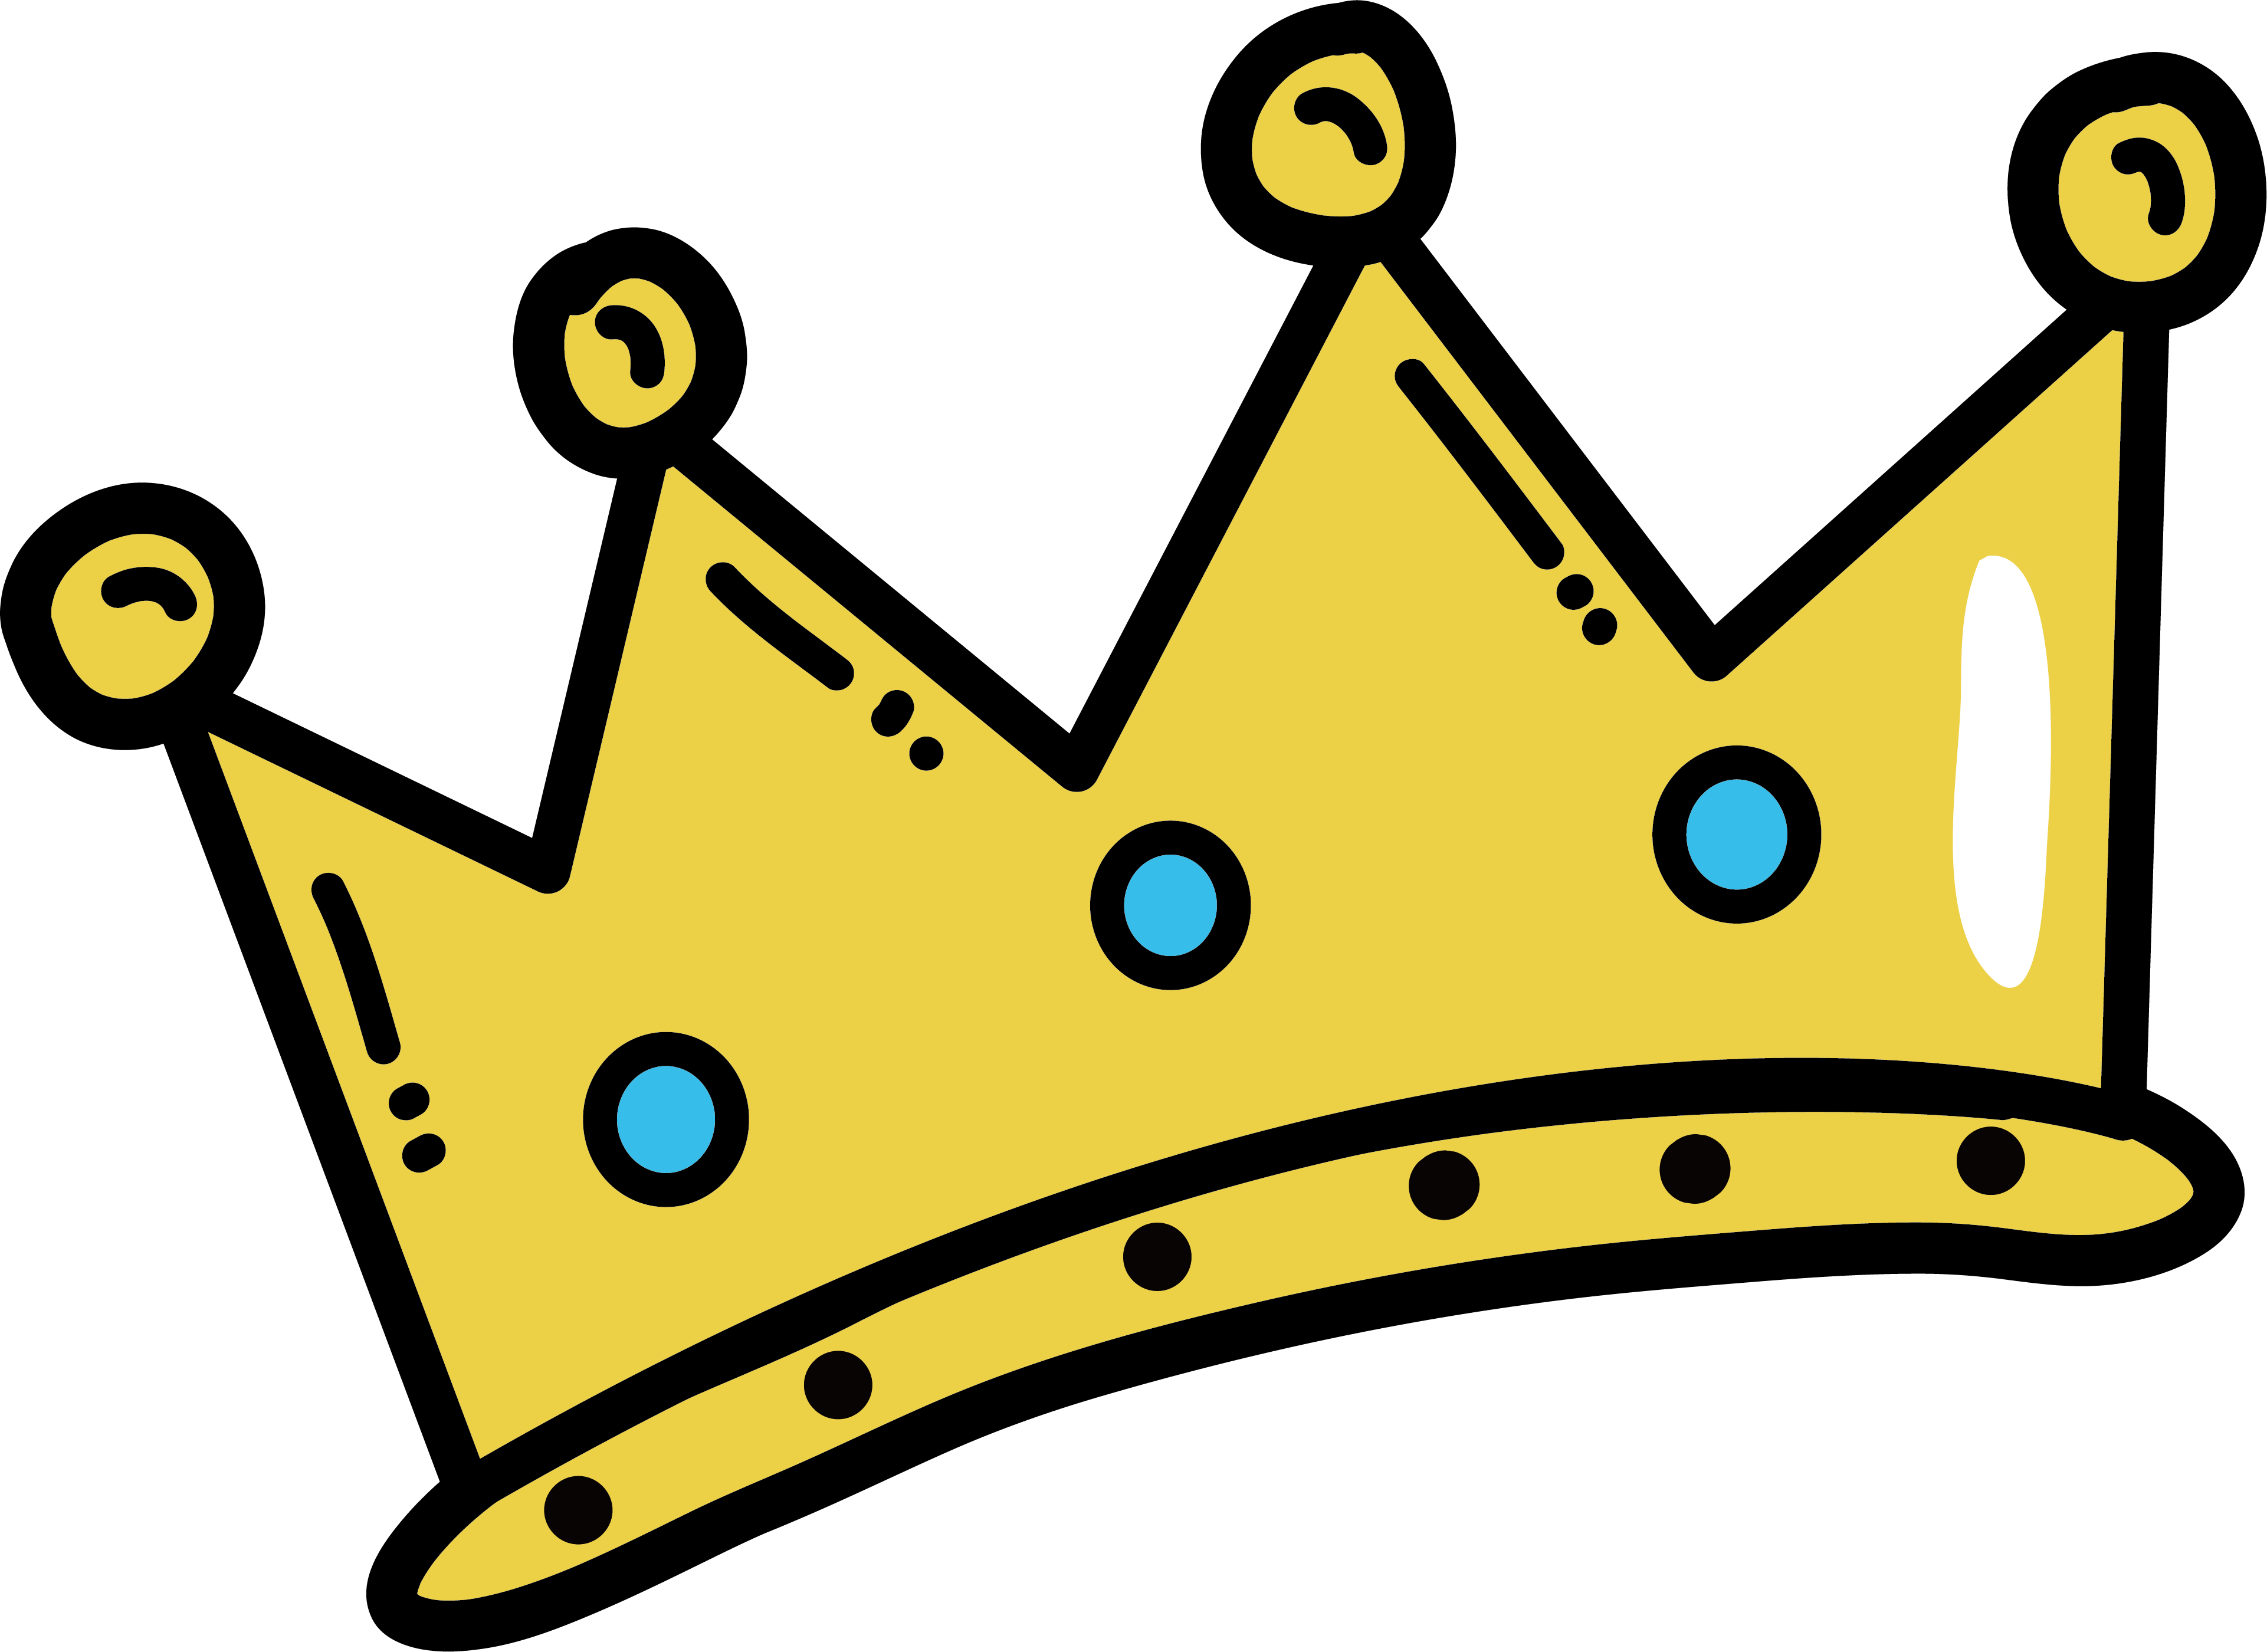 Cartoon Crown Transparent Background #1466824 (License: Personal Use) .